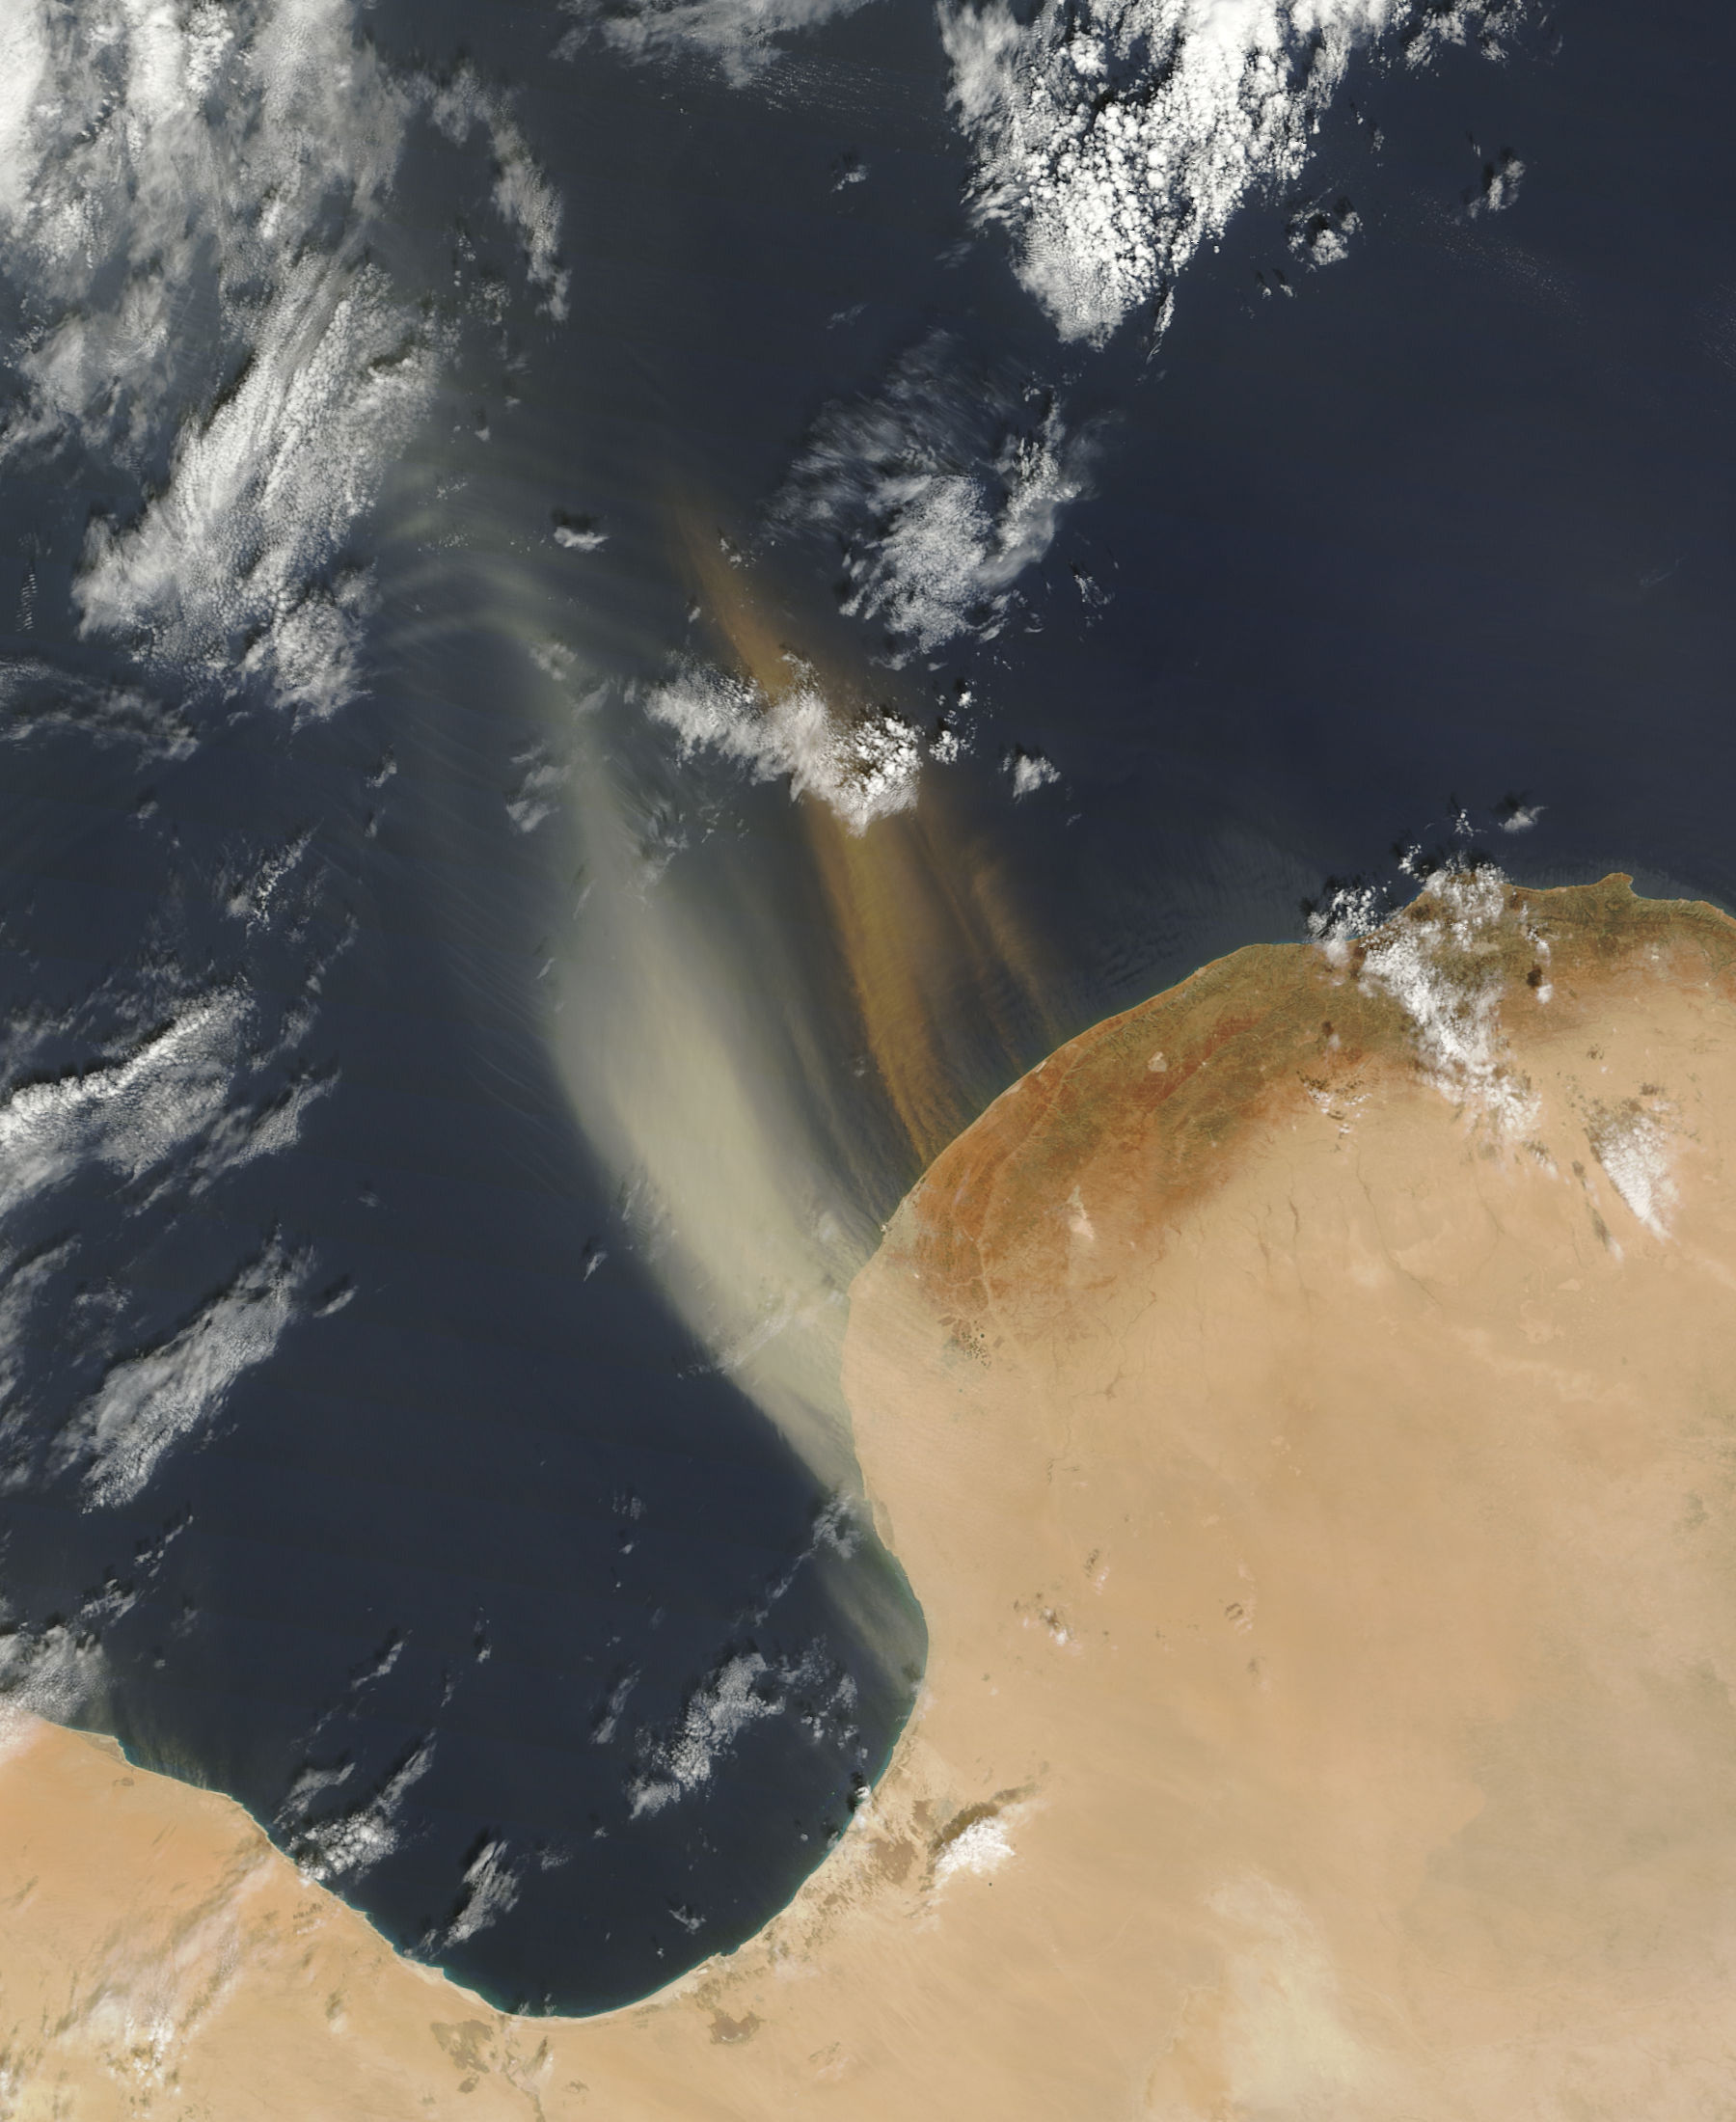 Dust Plumes off Libya - related image preview